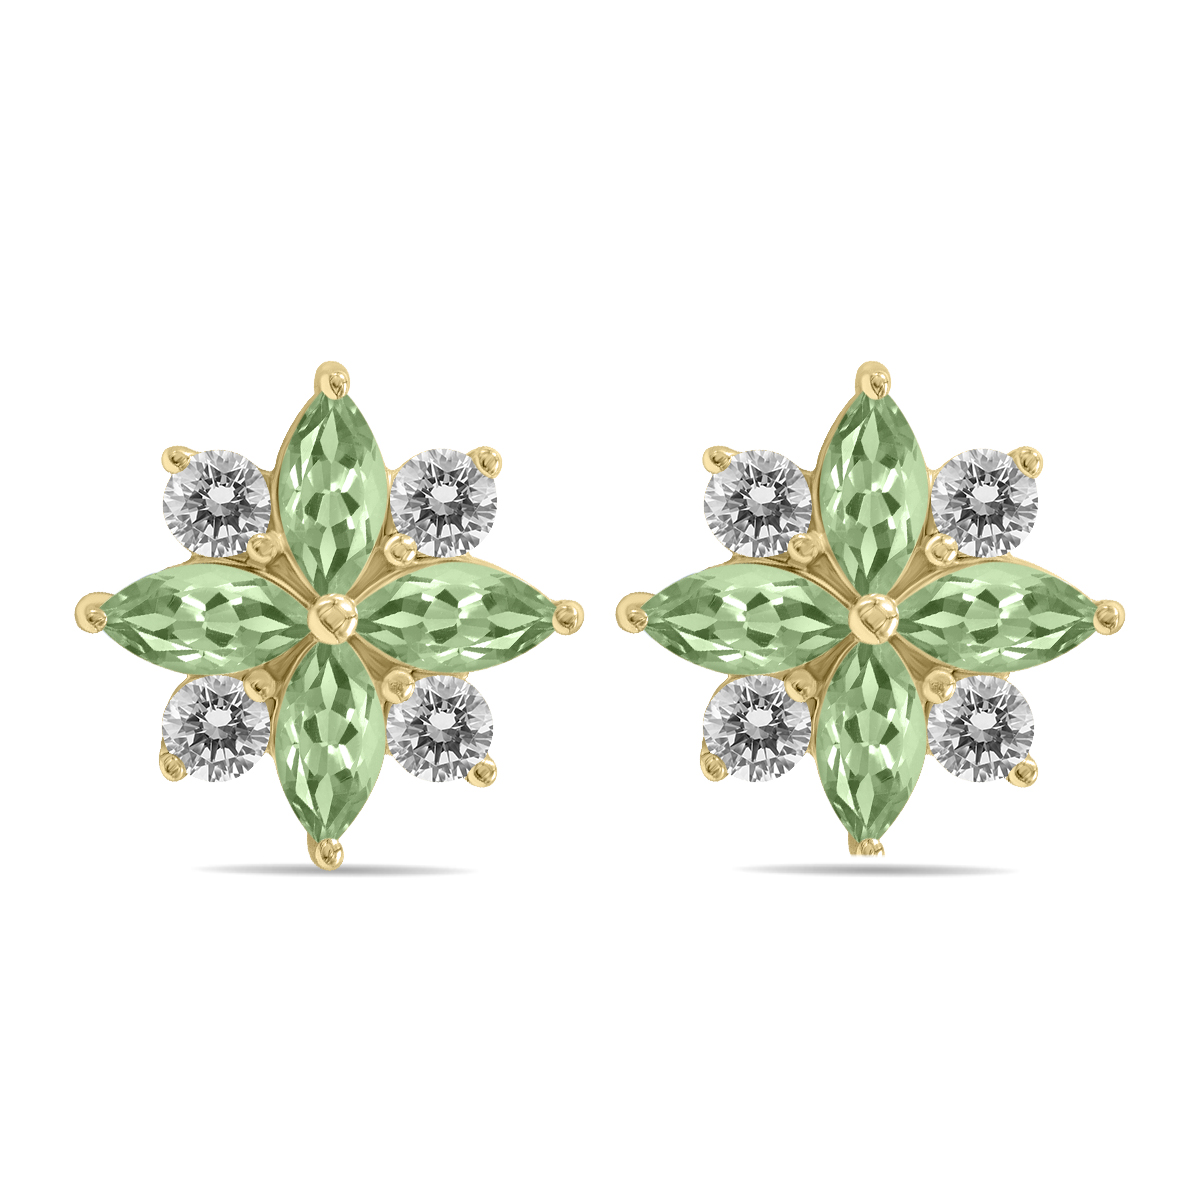 Image of 1 Carat TW Green Amethyst and Diamond Flower Earrings in 10K Yellow Gold